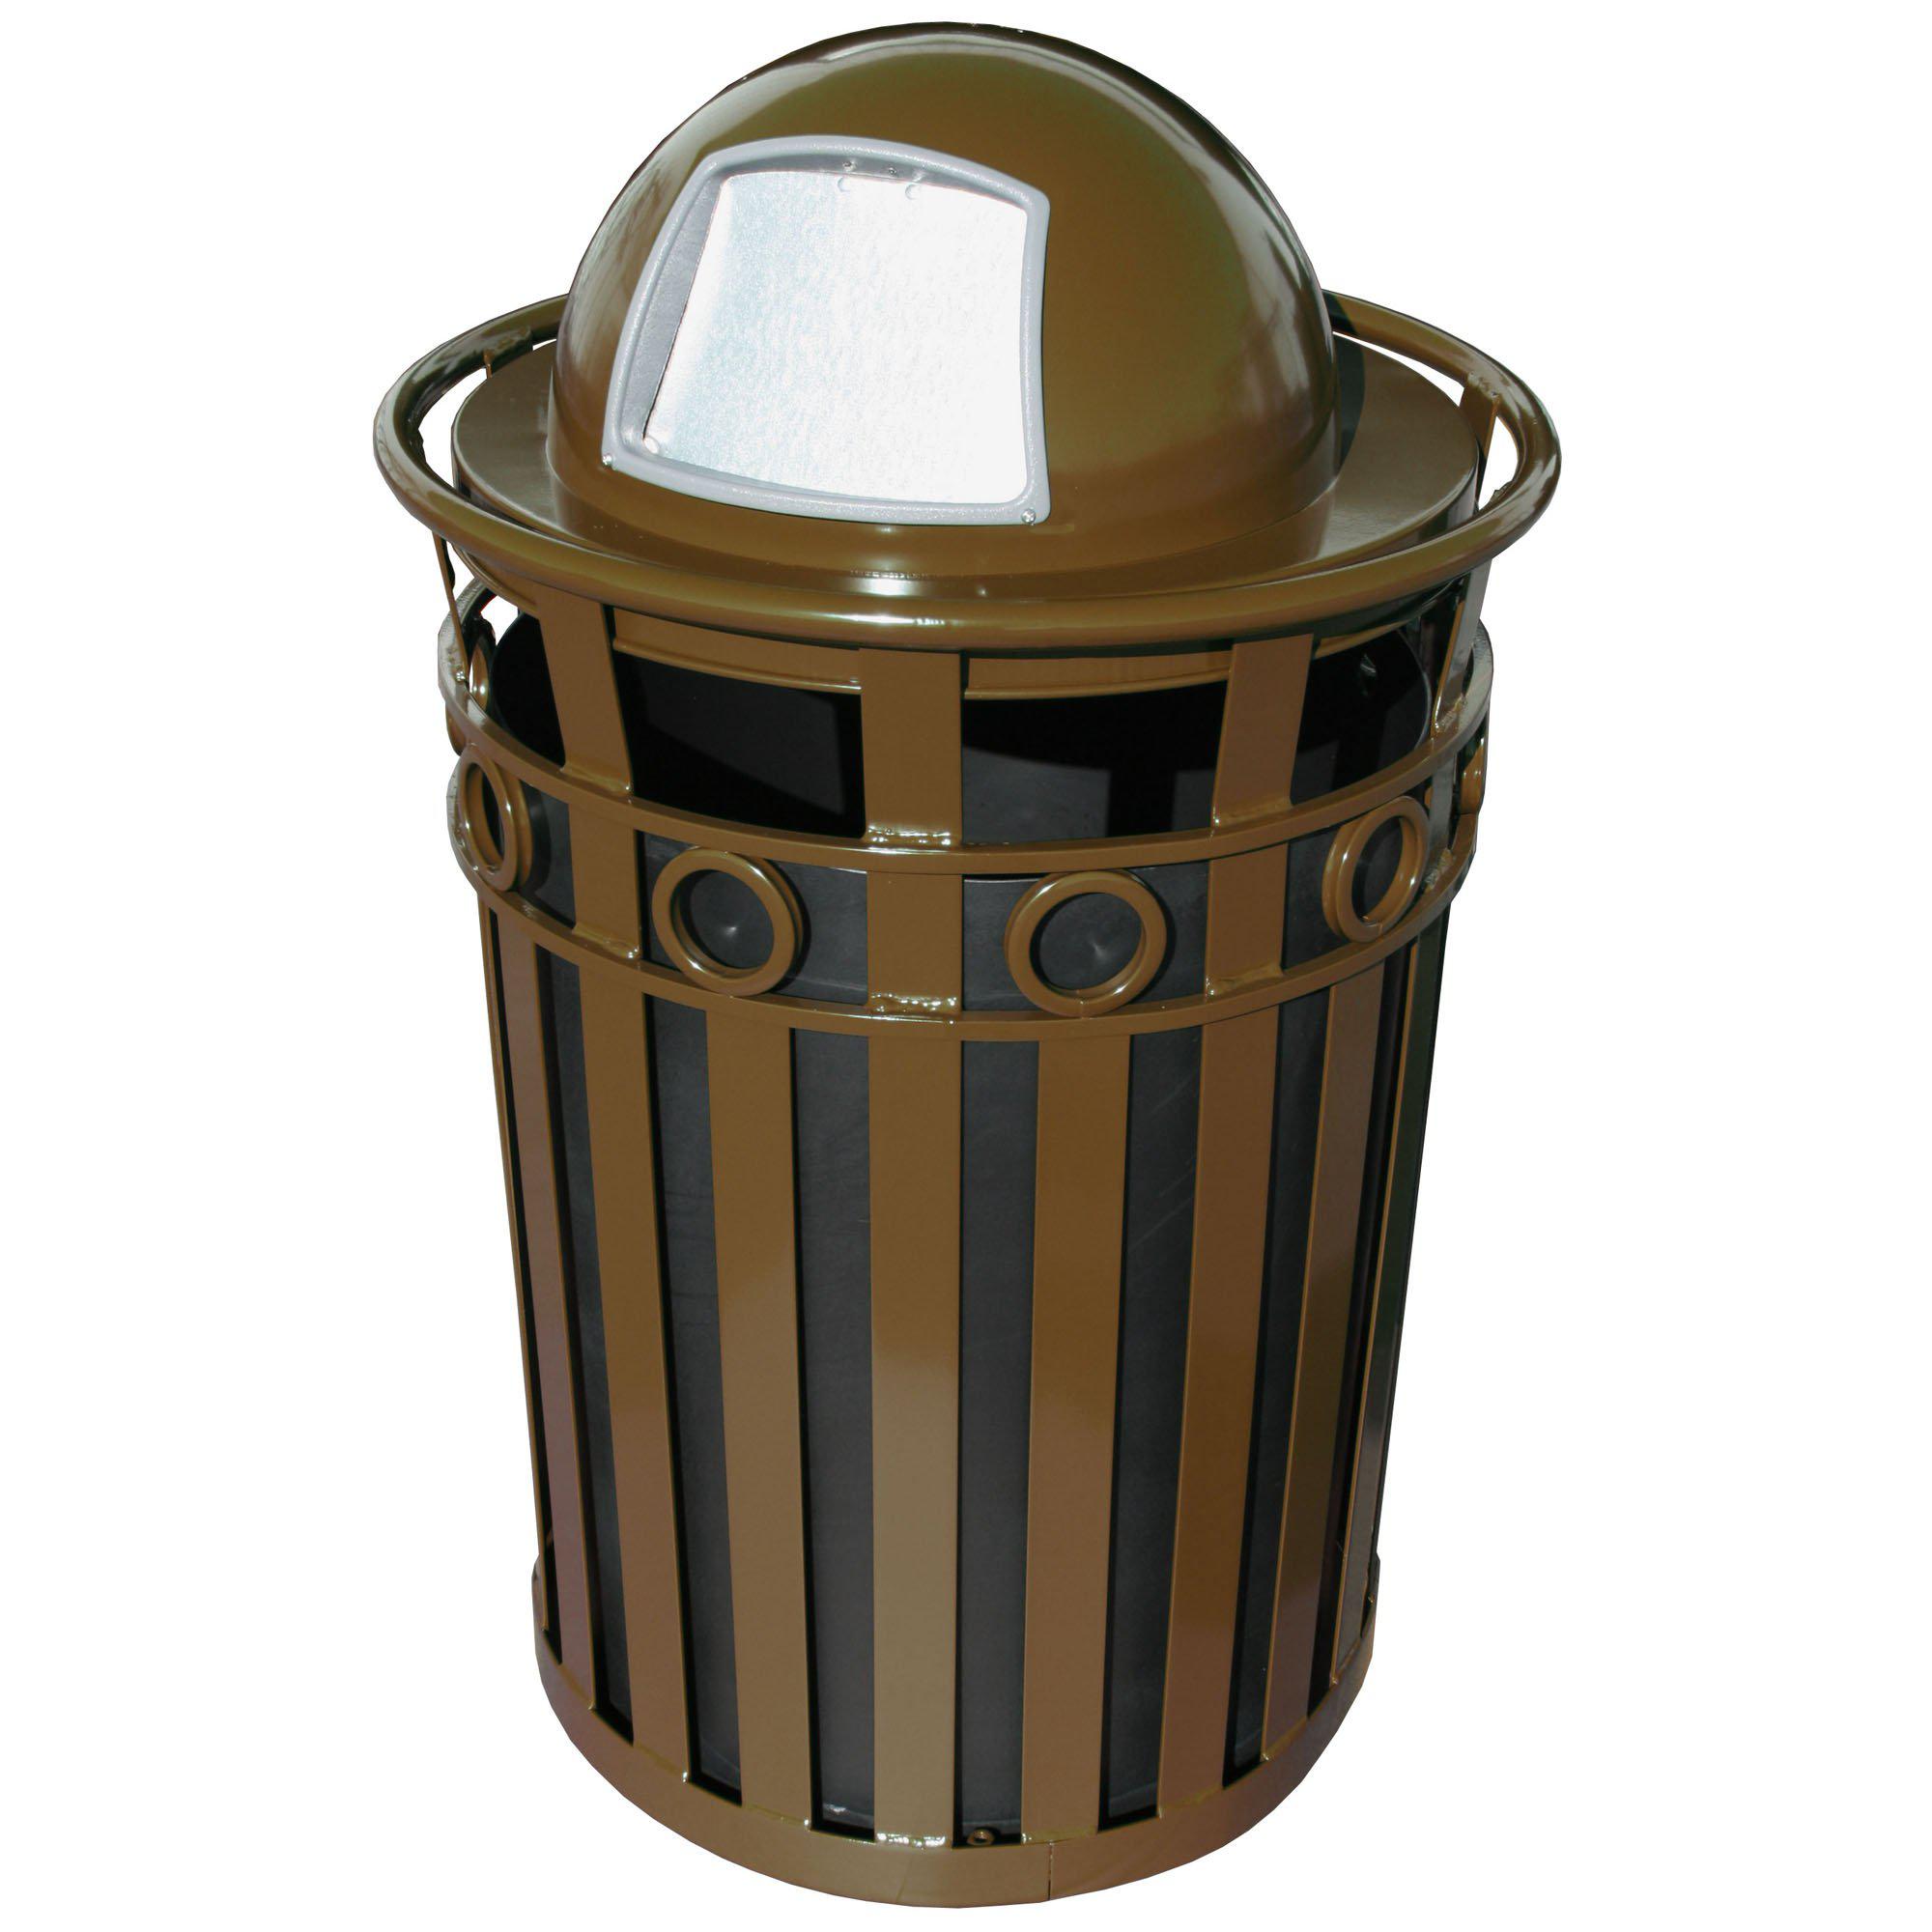 Oakley Collection Decorative Outdoor Trash Receptacle with Dome Top, 36-Gallon Capacity